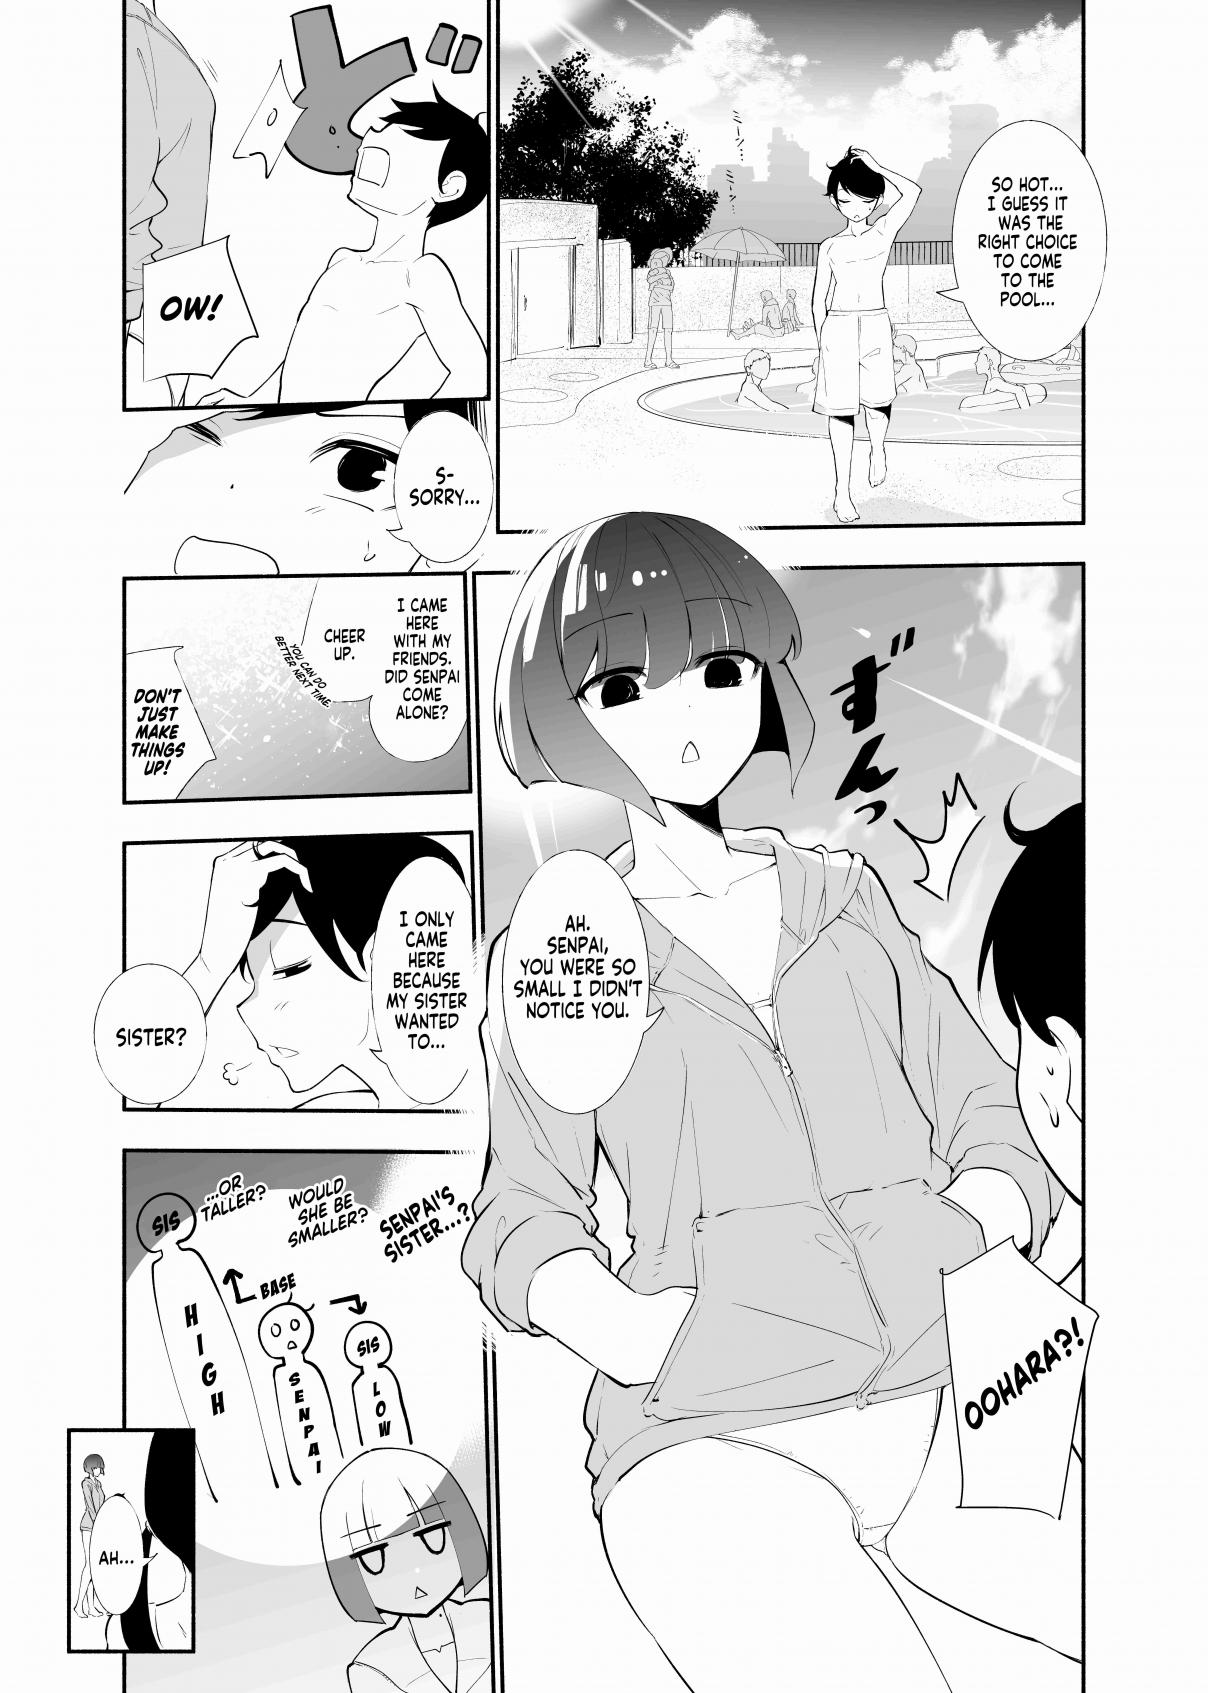 Until the Tall Kouhai (♀) and the Short Senpai (♂) Relationship Develops Into Romance Vol. 1 Ch. 5 Kouhai, Pool & Younger Sister